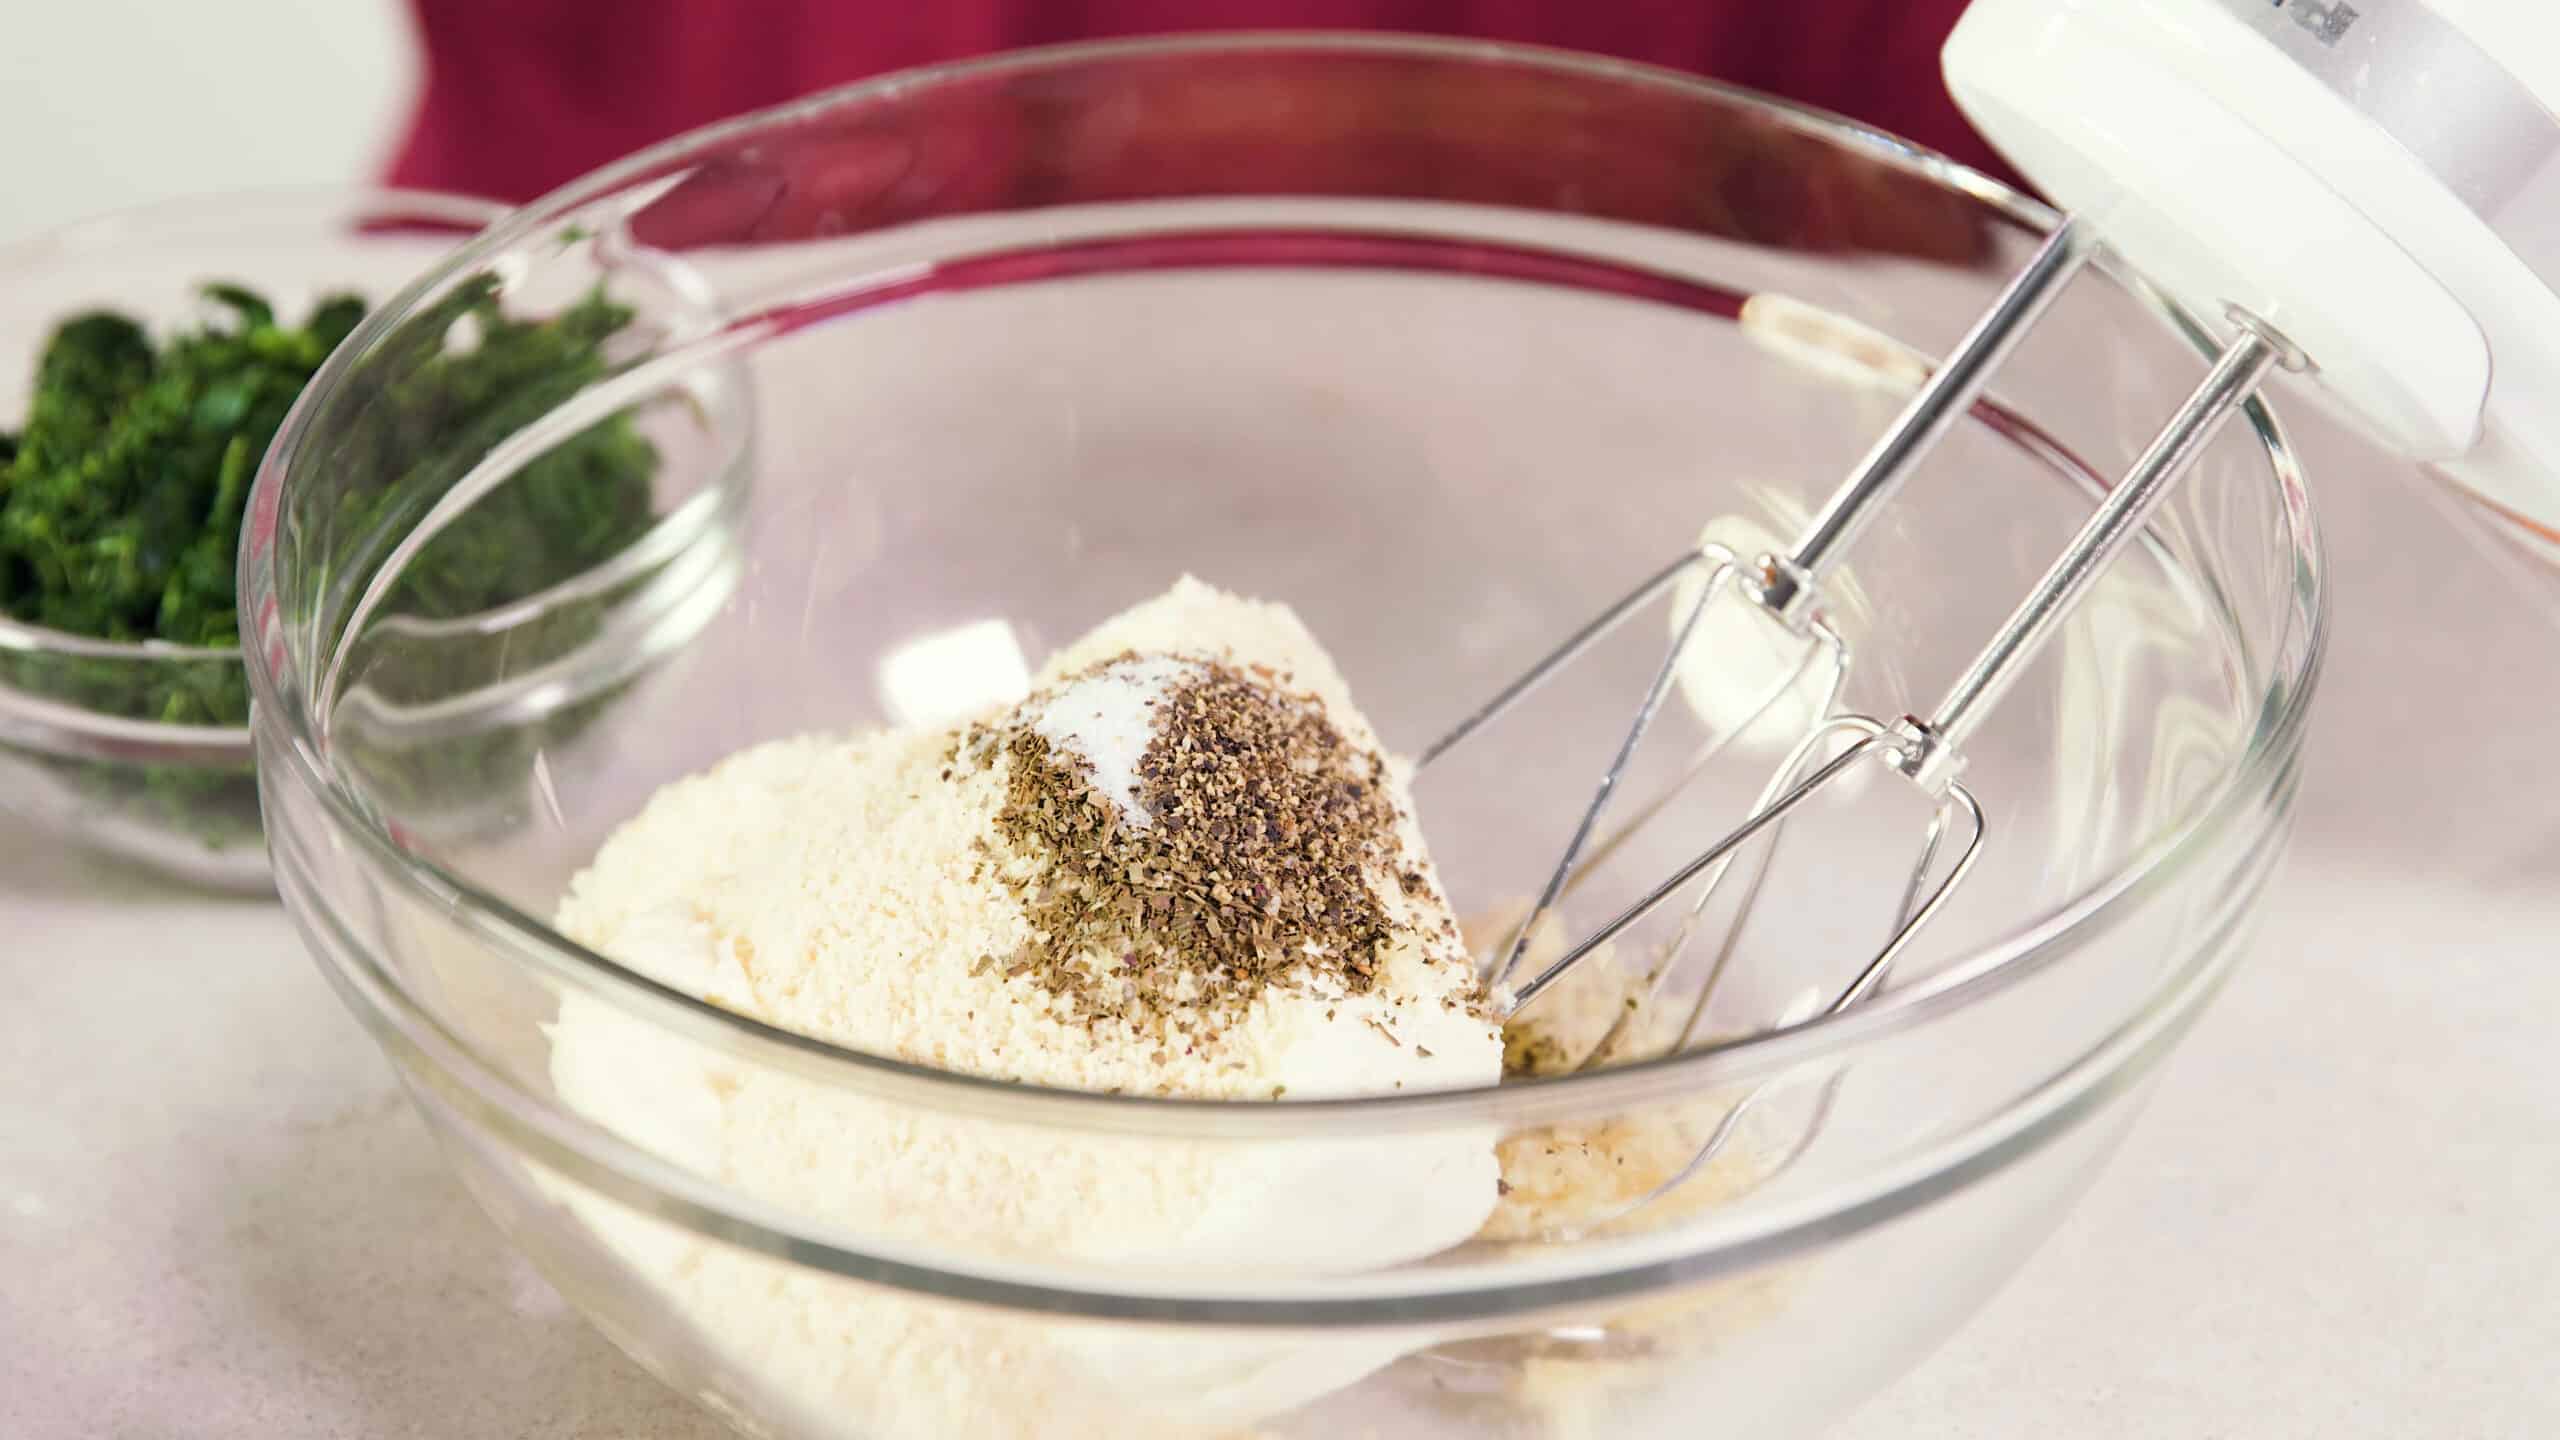 Angled view of a large clear glass mixing bowl filled with ingredients for the artichoke dip including cream cheese, salt and pepper, parmesan cheese and minced garlic with wire beaters in a hand mixer at the ready to combine.